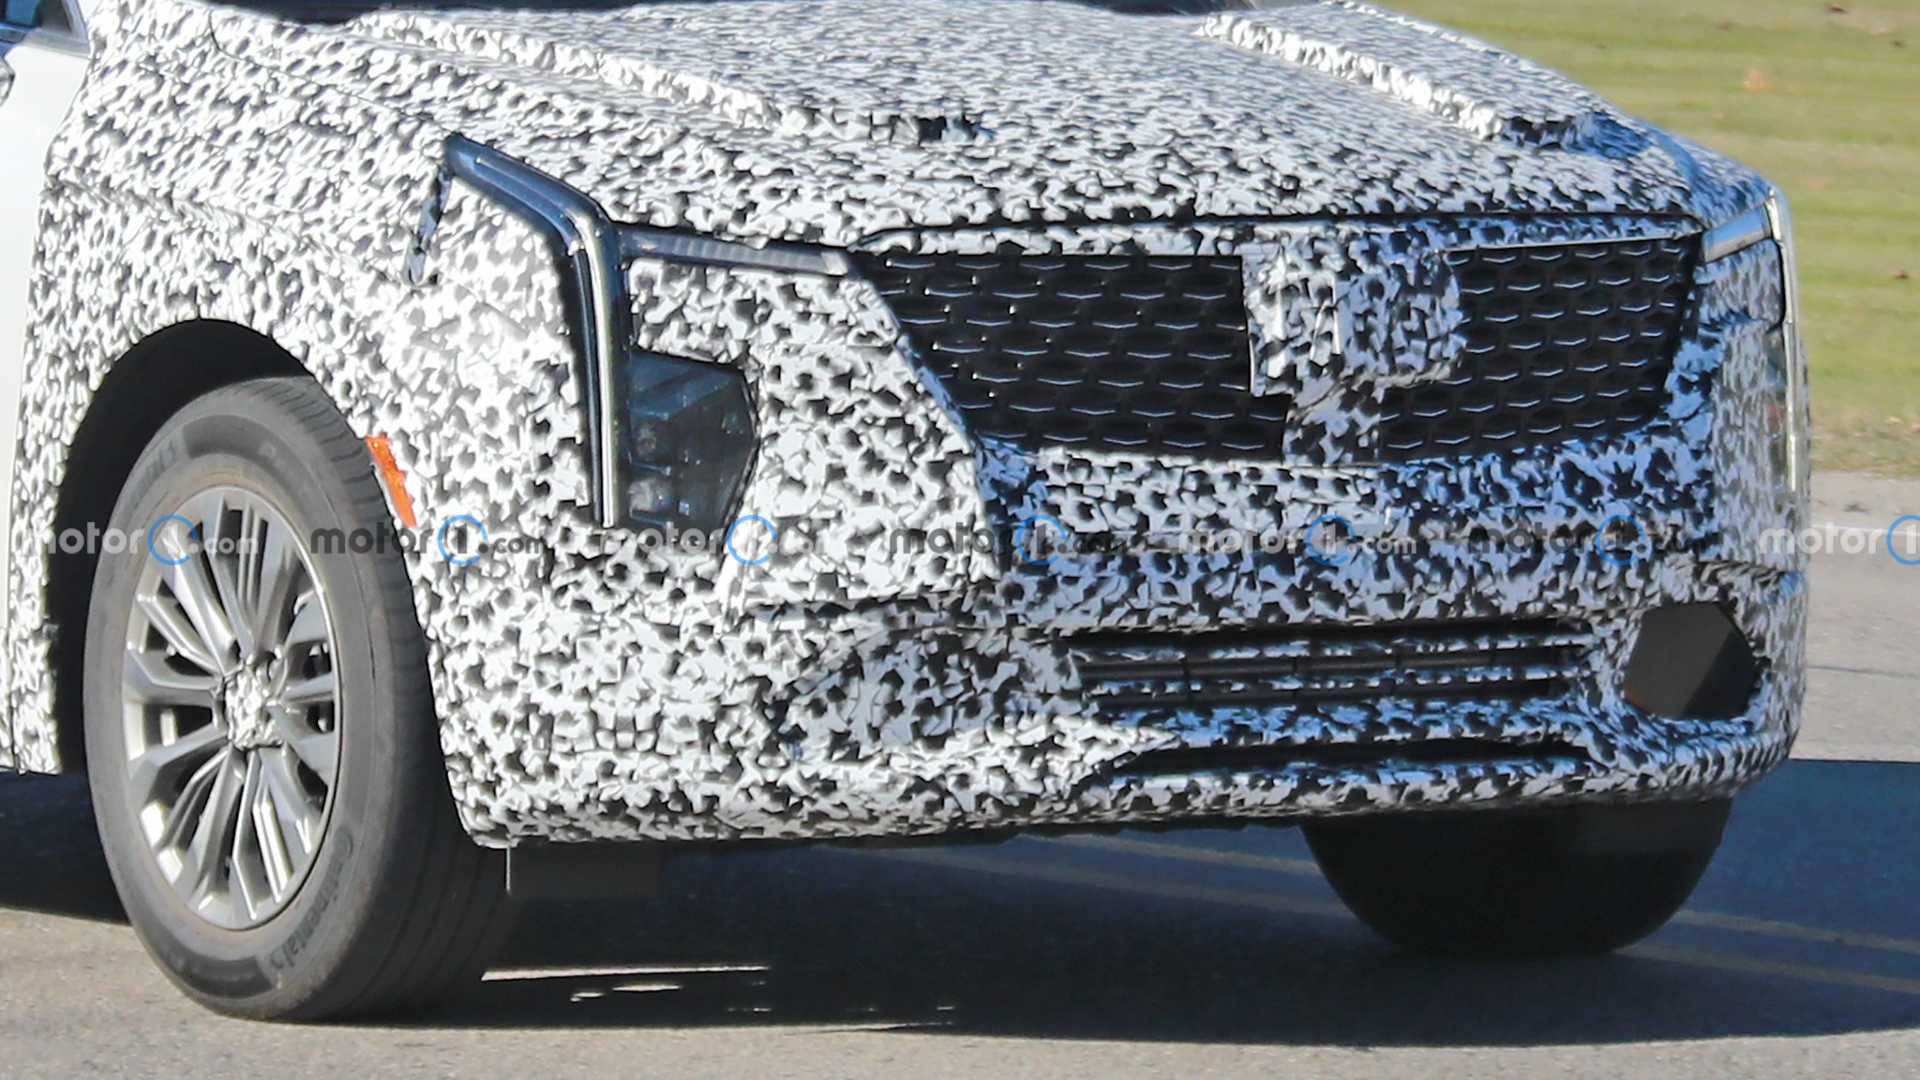 New Cadillac XT4 Spy shots reveal the revamped front design.